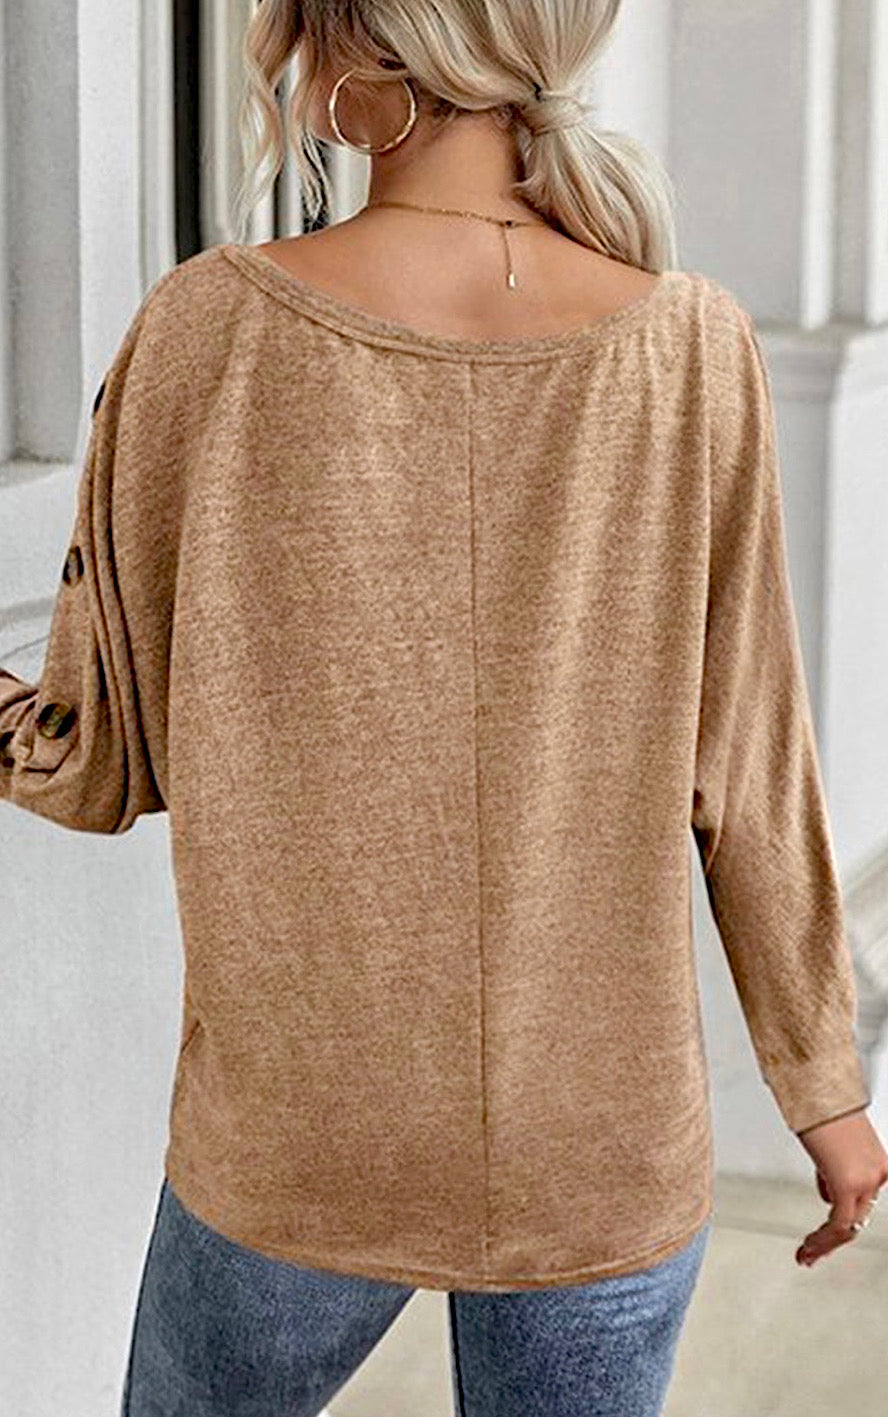 Cozy With Sass Boat Neck Top